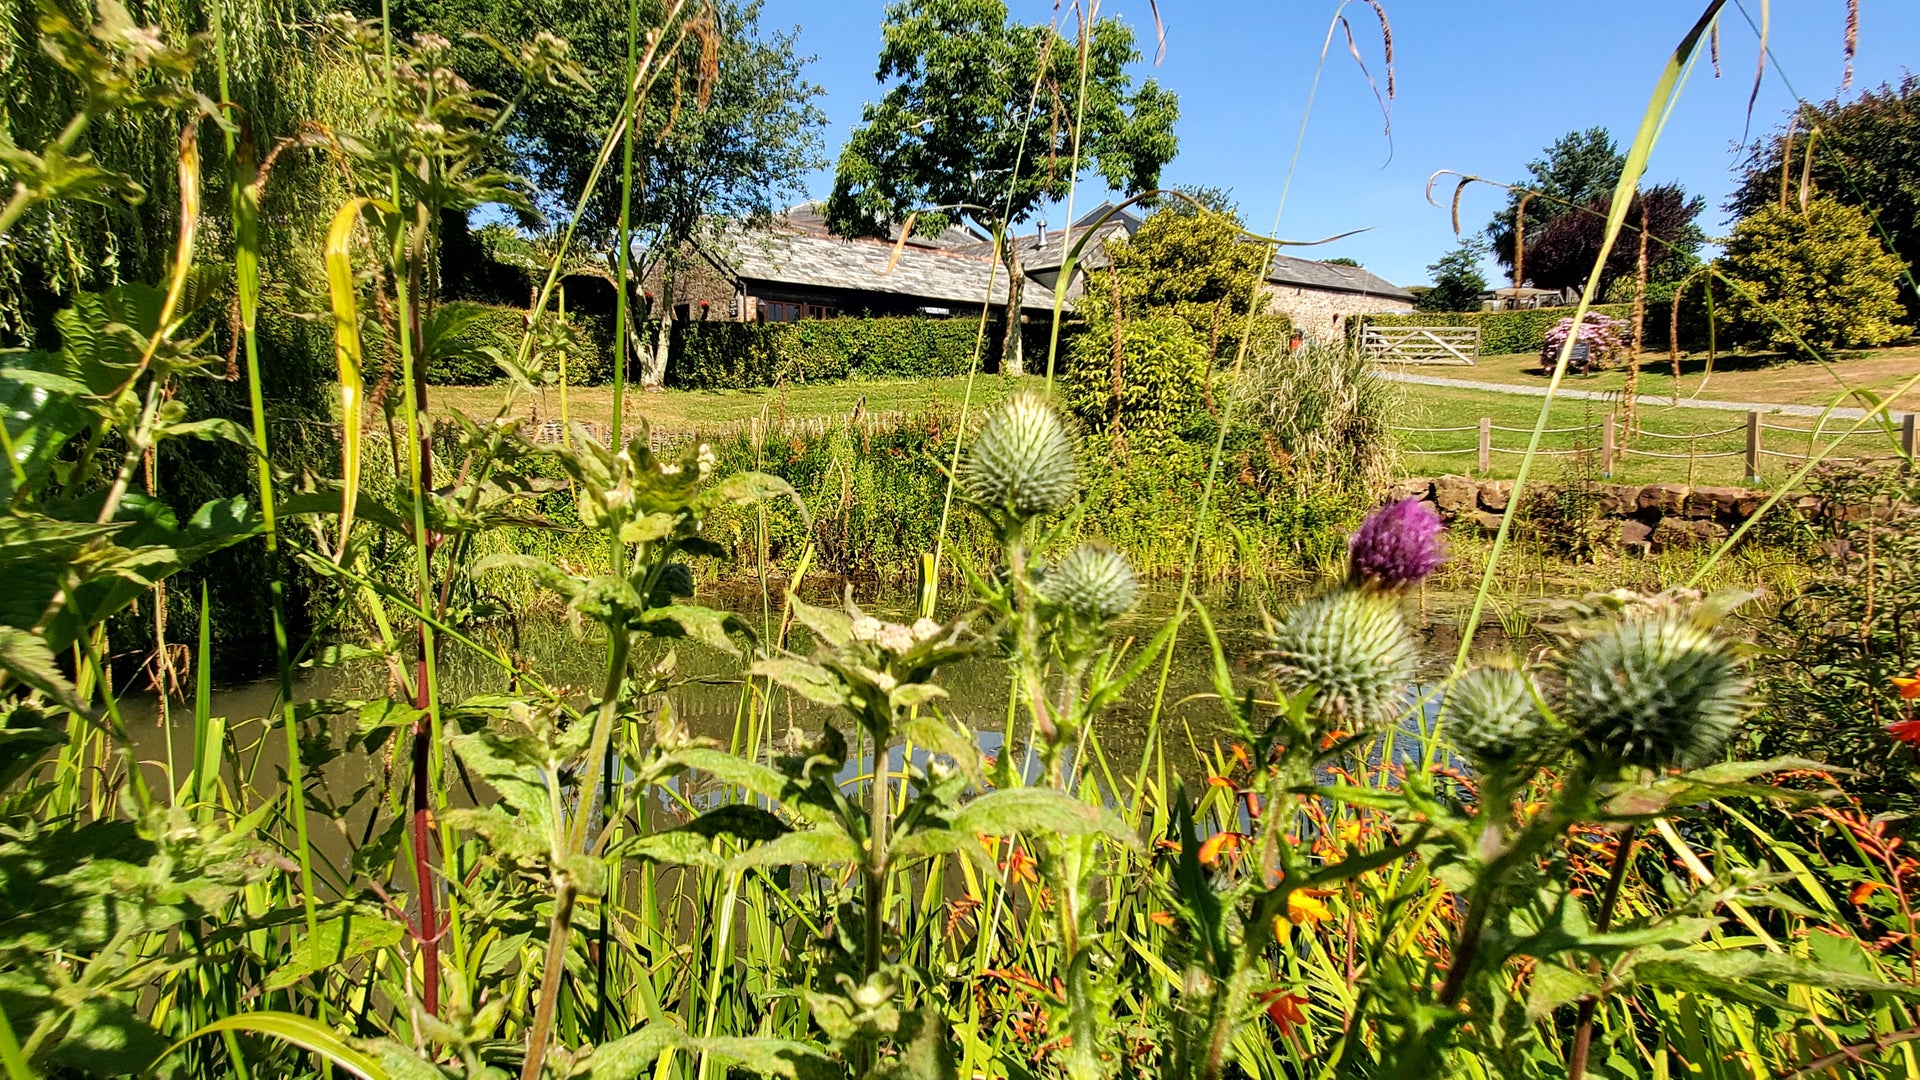 Artist studio set on a farm with wild flowers in the foreground